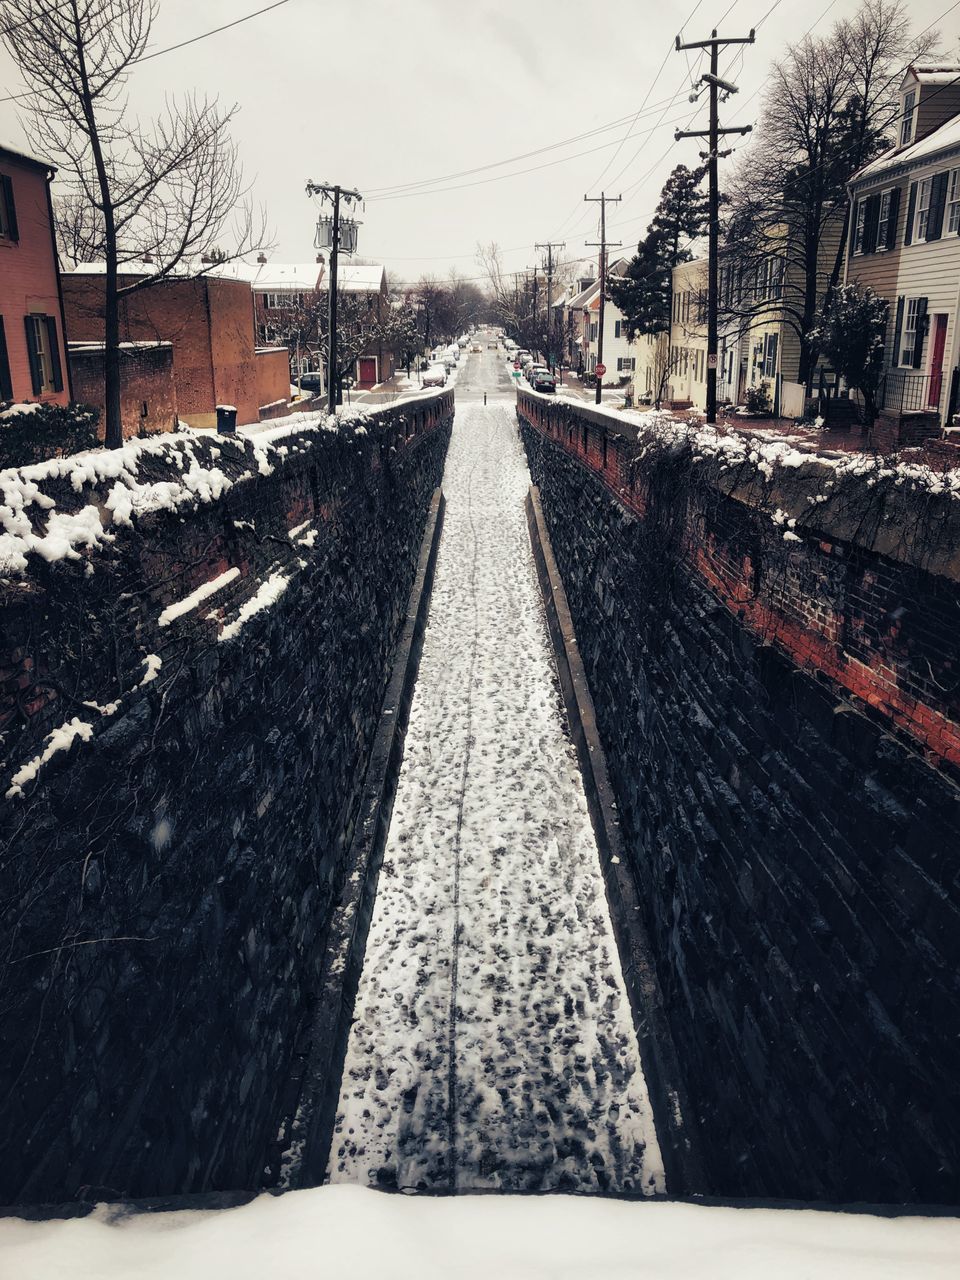 VIEW OF RAILROAD TRACKS DURING WINTER